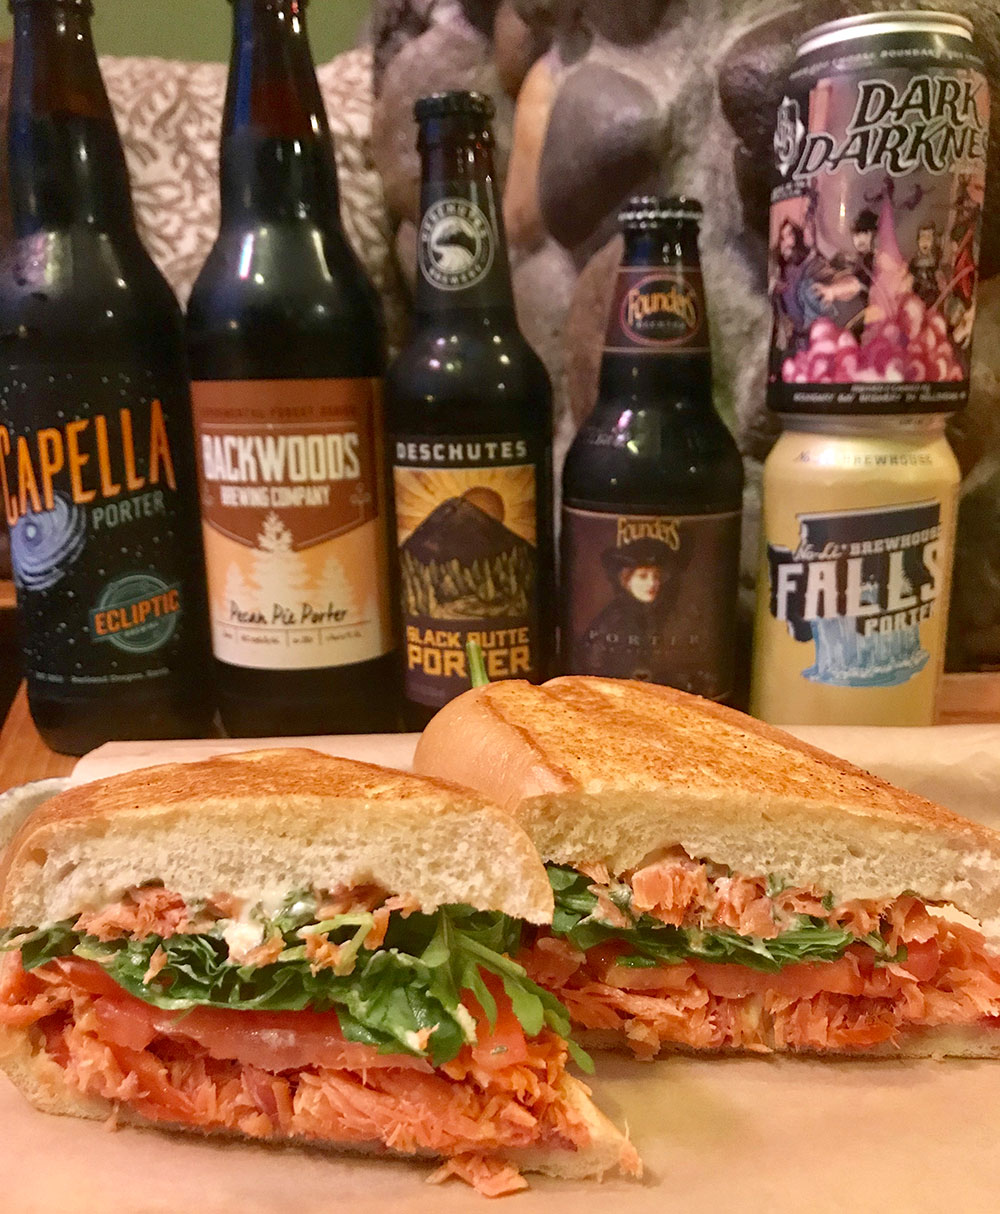 Peaks-and-Pints-Tacoma-restaurant-best-smoked-salmon-BLT-sandwich